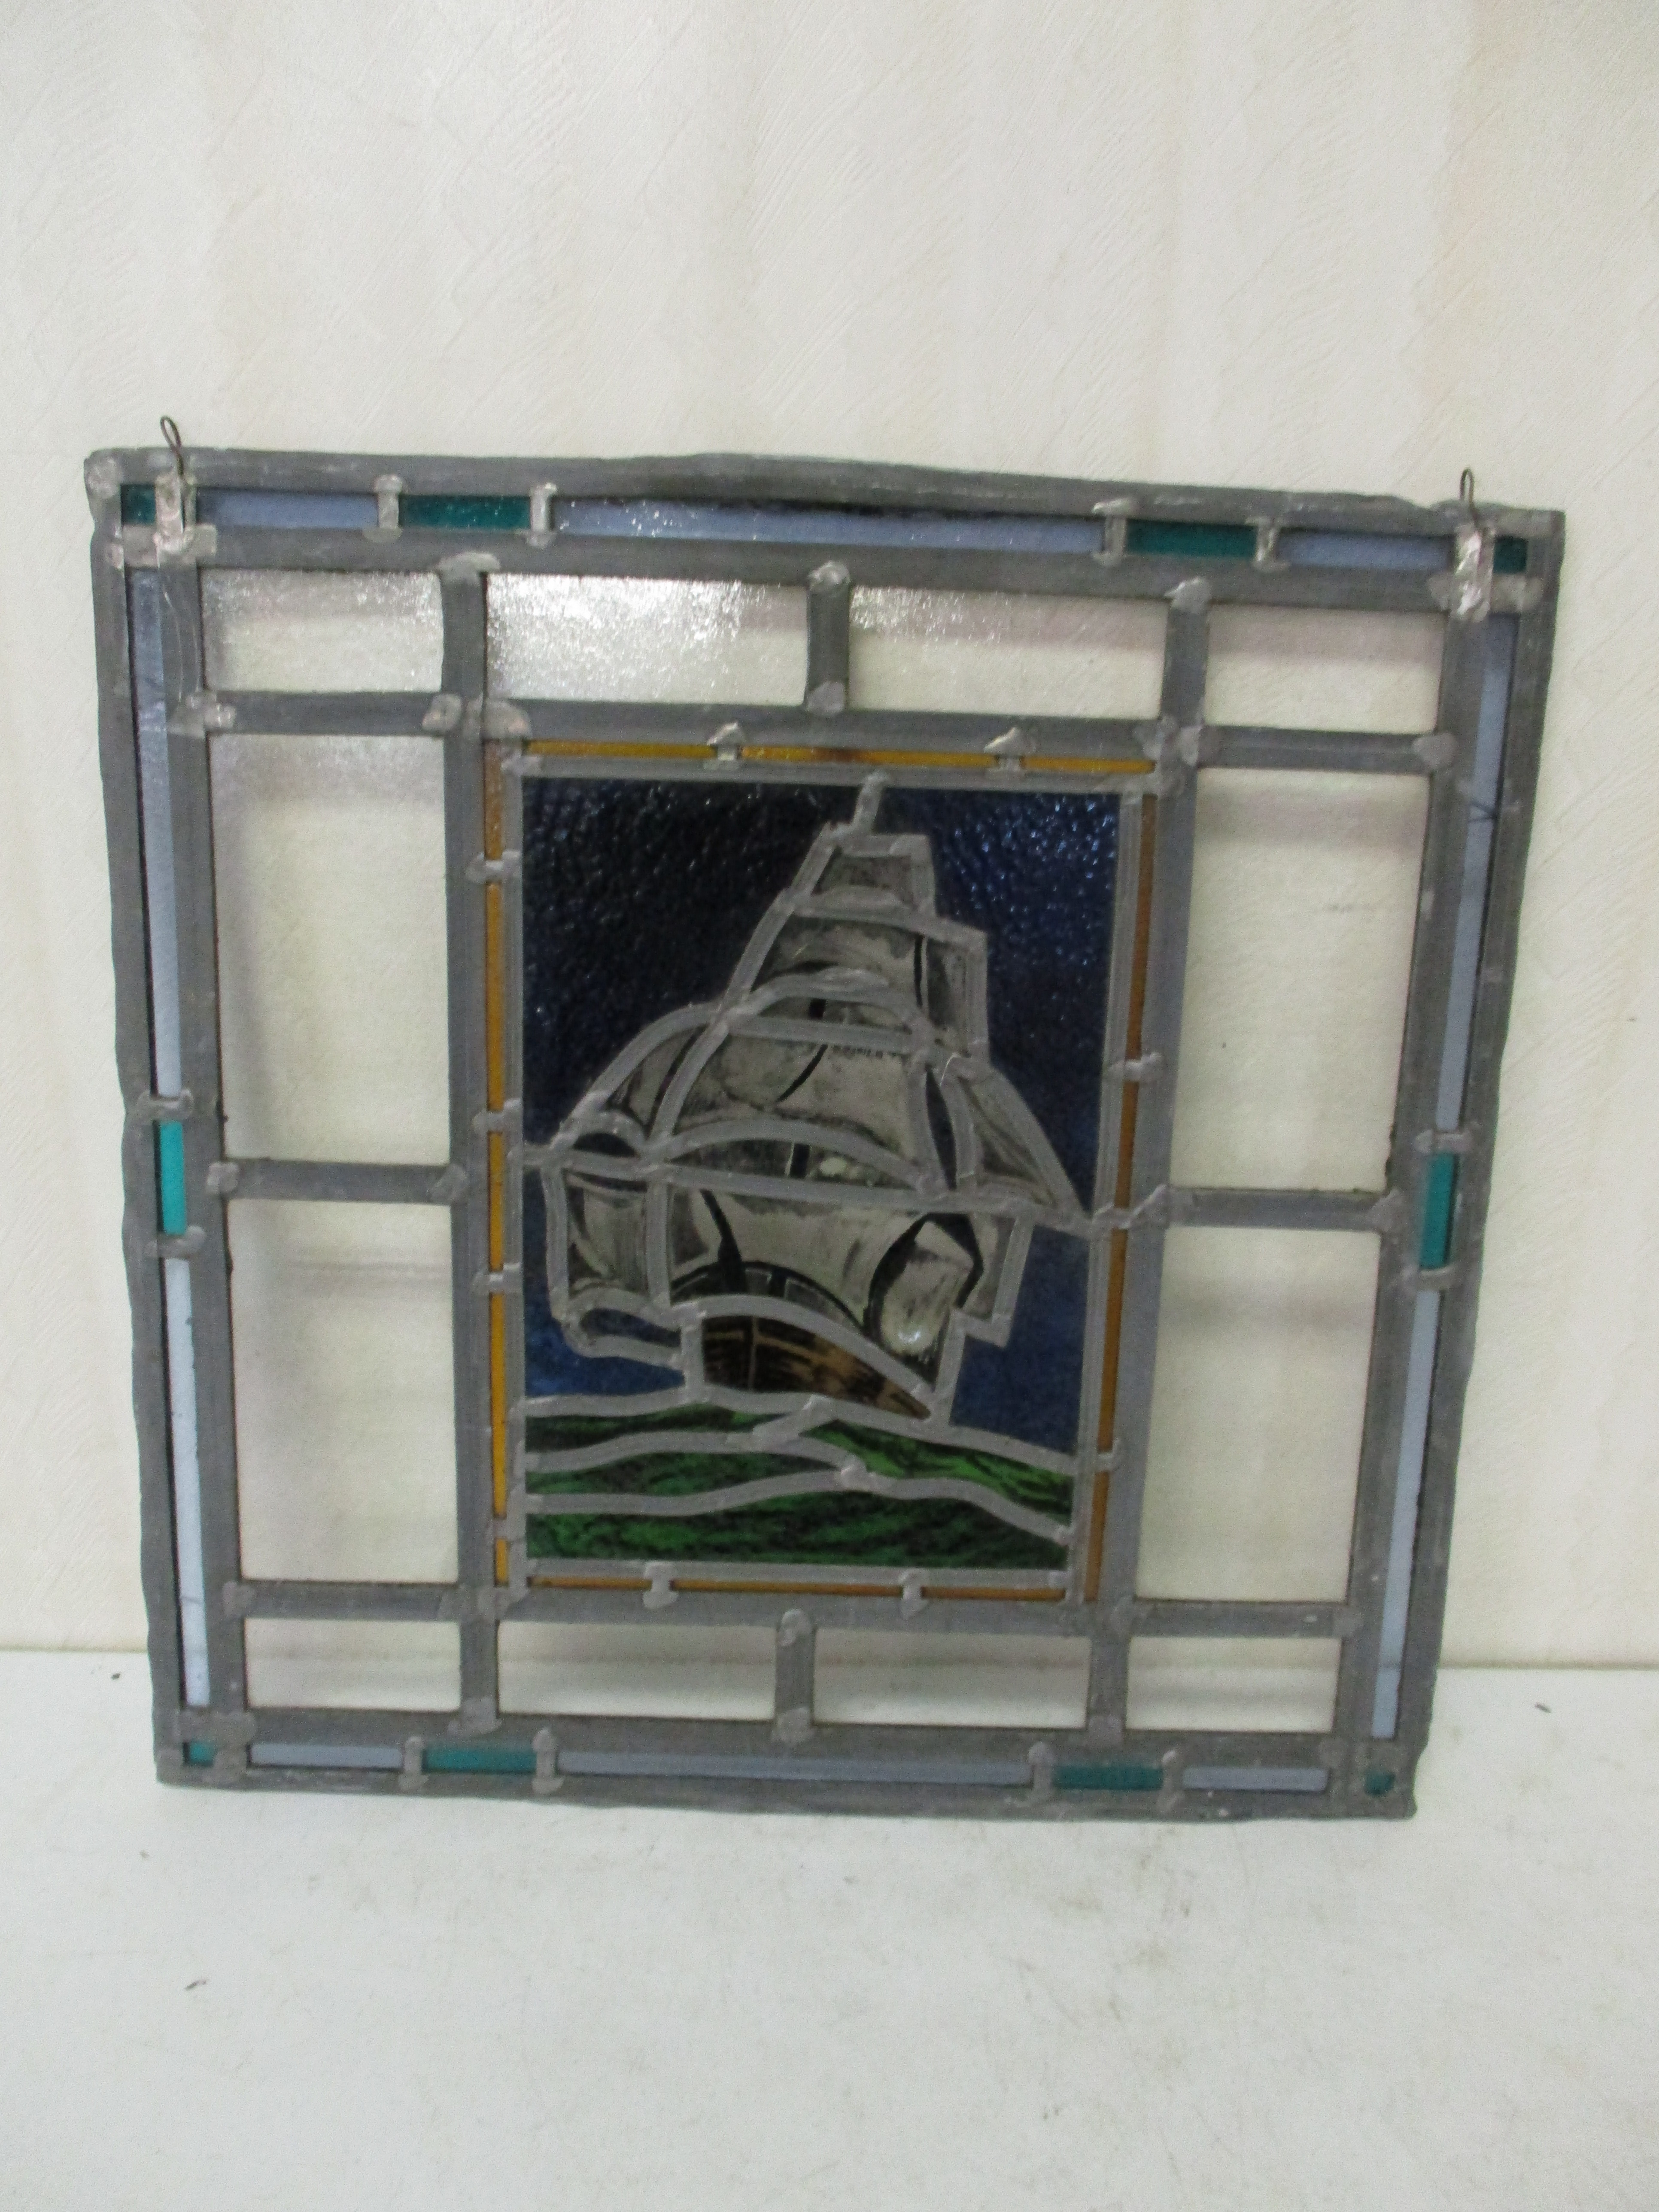 Lot 226: Leaded Glass With Ship Scene - 20" X 20"